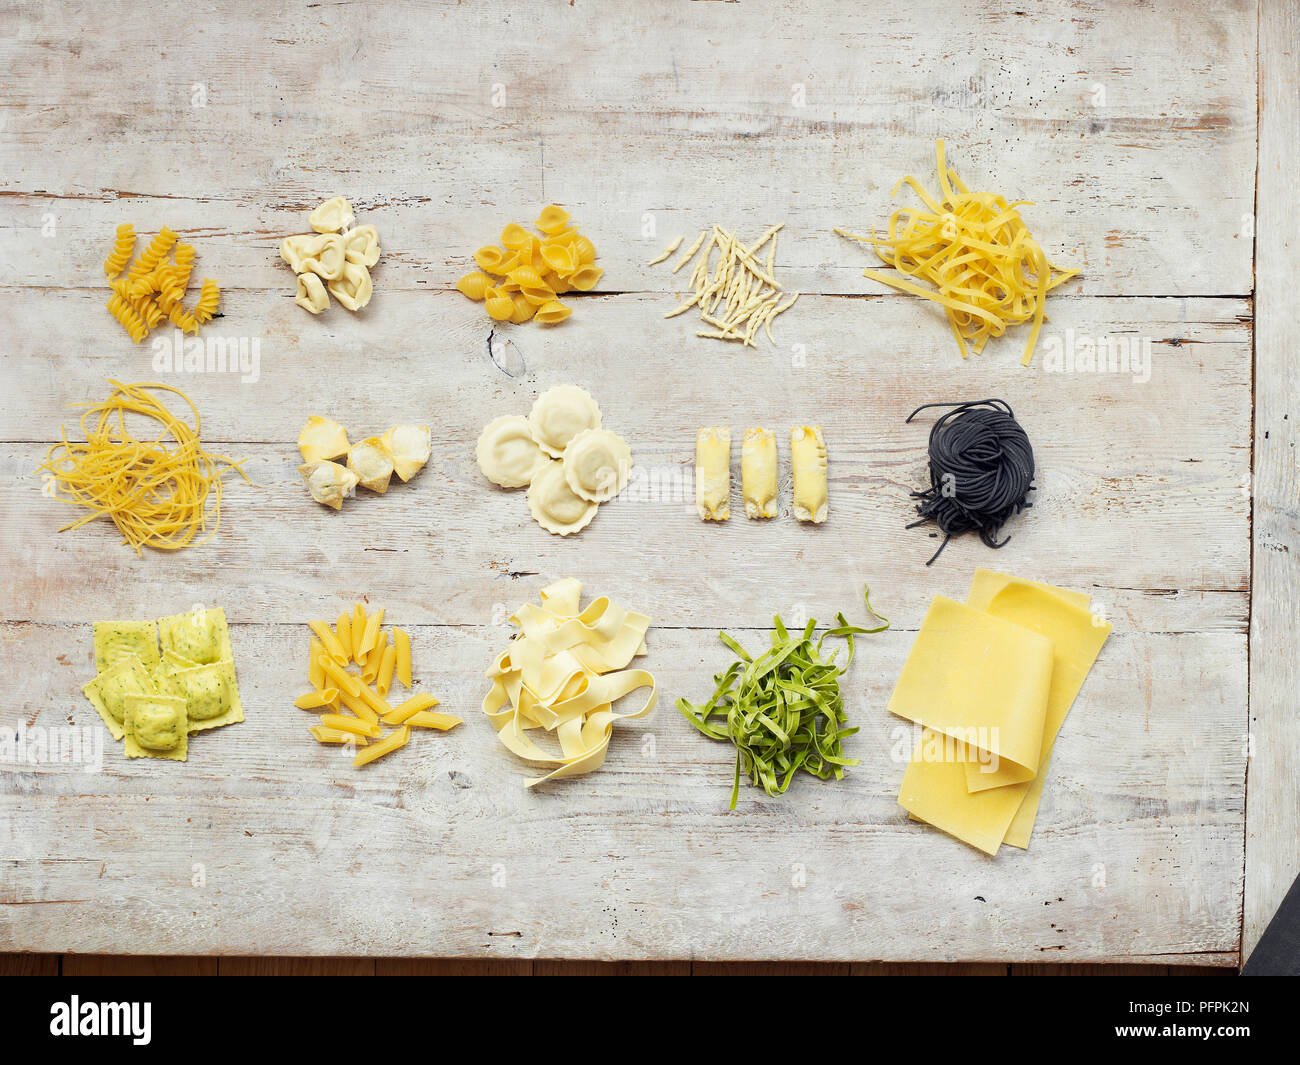 Different types of pasta on wood background, including filled pasta, ribbon pasta, pasta tubes, on wood background Stock Photo